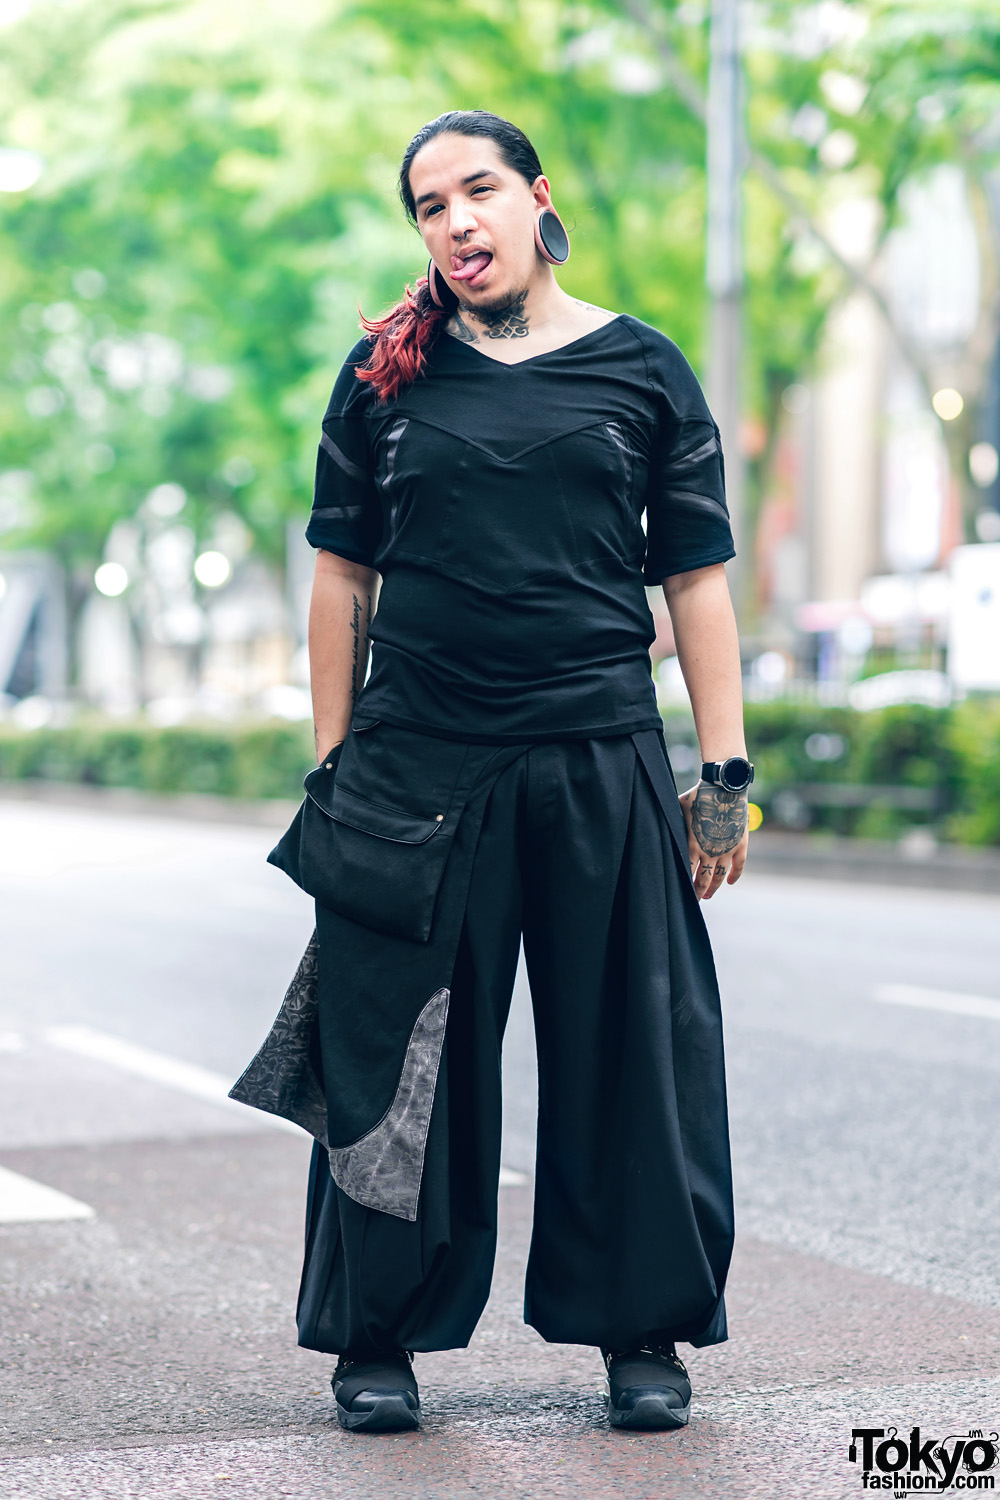 Body Modification Artist in Harajuku w/ Split Tongue, Tattoos, Stretched Ears, Aoi Clothing, Wide Leg Pants & Philipp Plein Sneakers